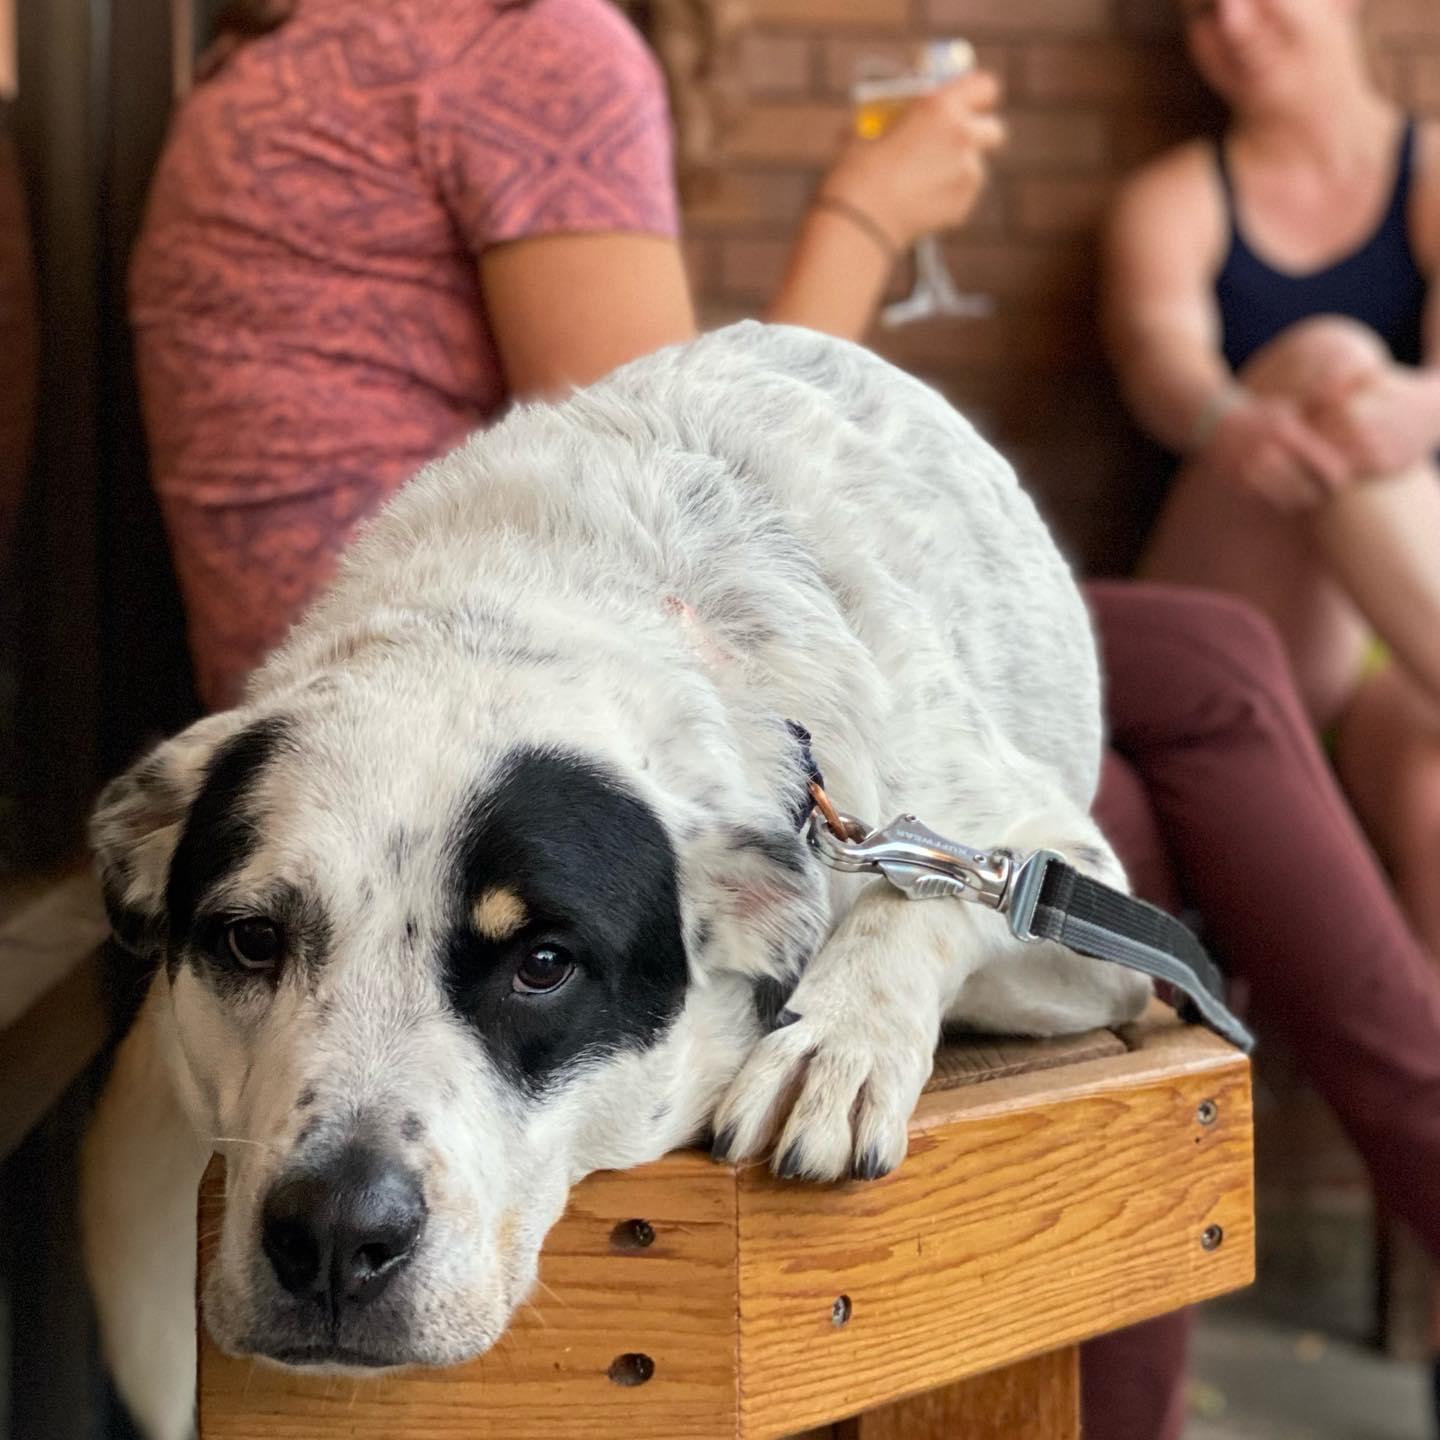 Pet Friendly Purpose Brewing and Cellars